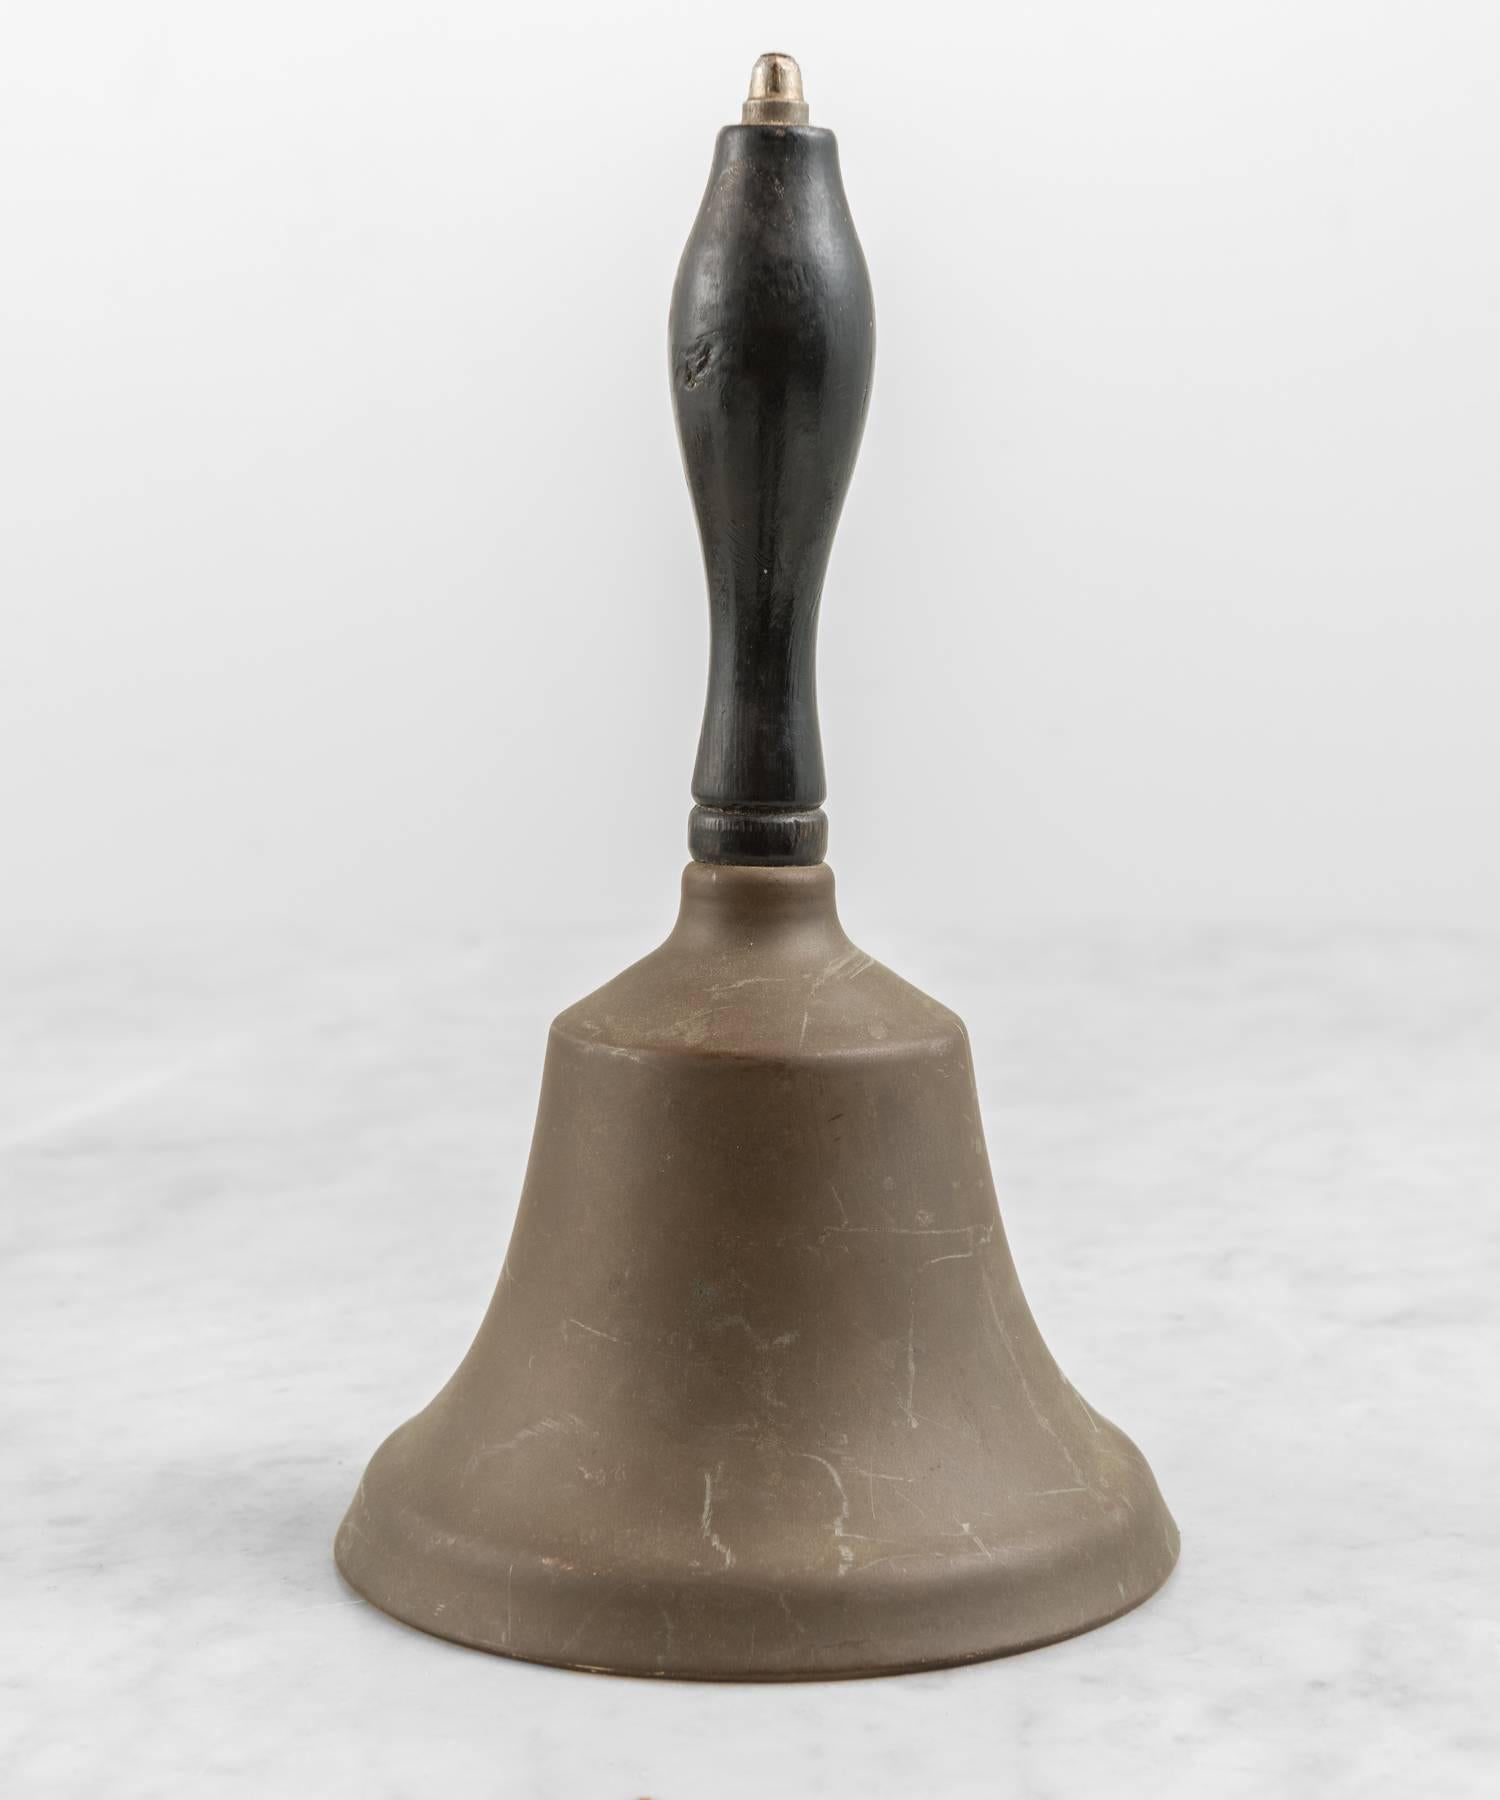 American Medium Sized Bell with Wooden Handle, circa 1900-1940